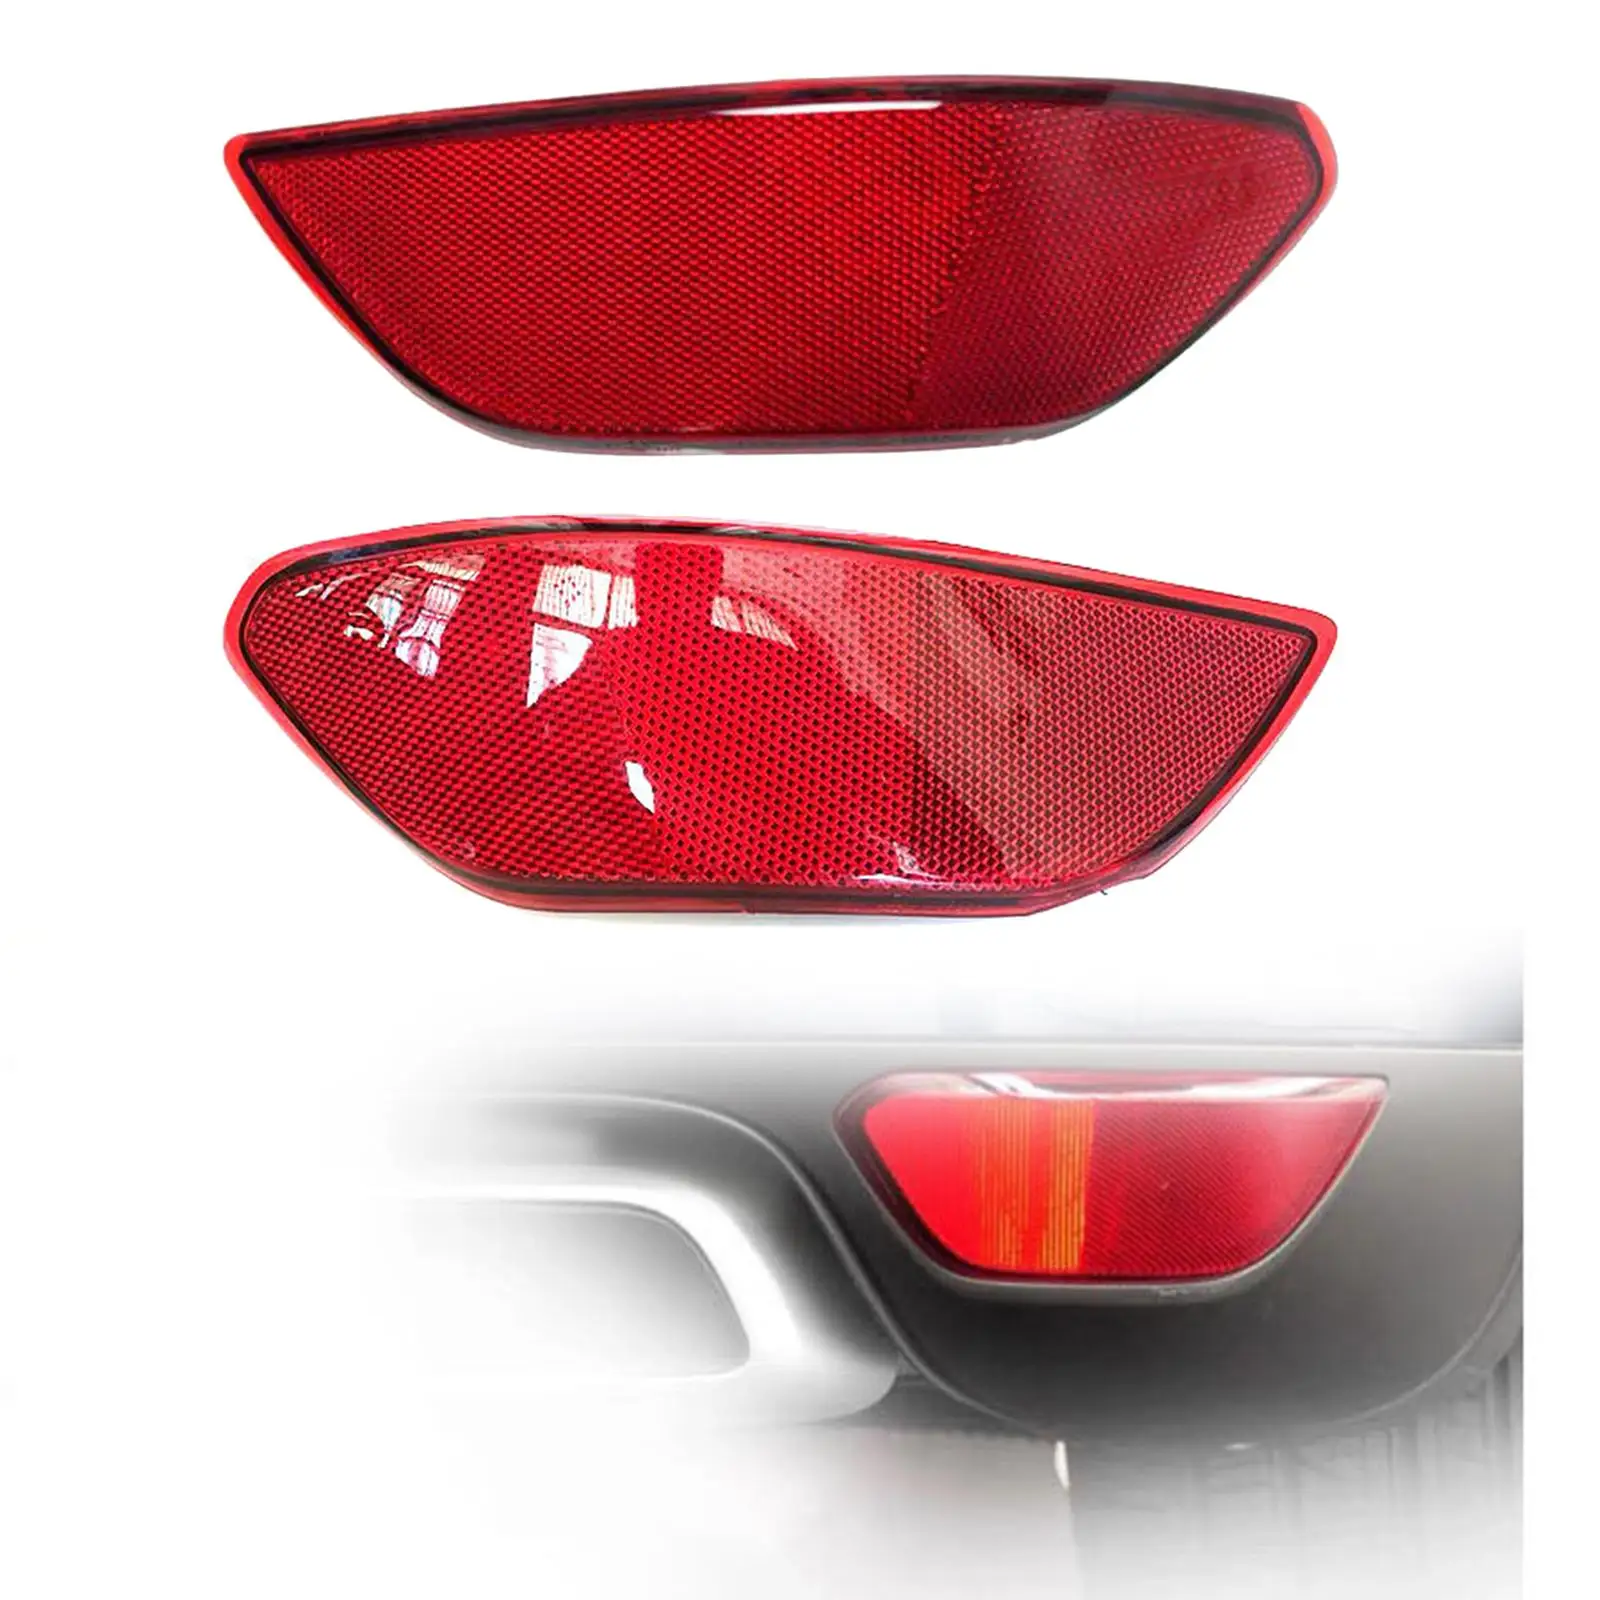 Reflector for Car Rear Reflective Reflection Marker Reflector for Porsche Cayenne Car Accessories Easy to Install Replaces